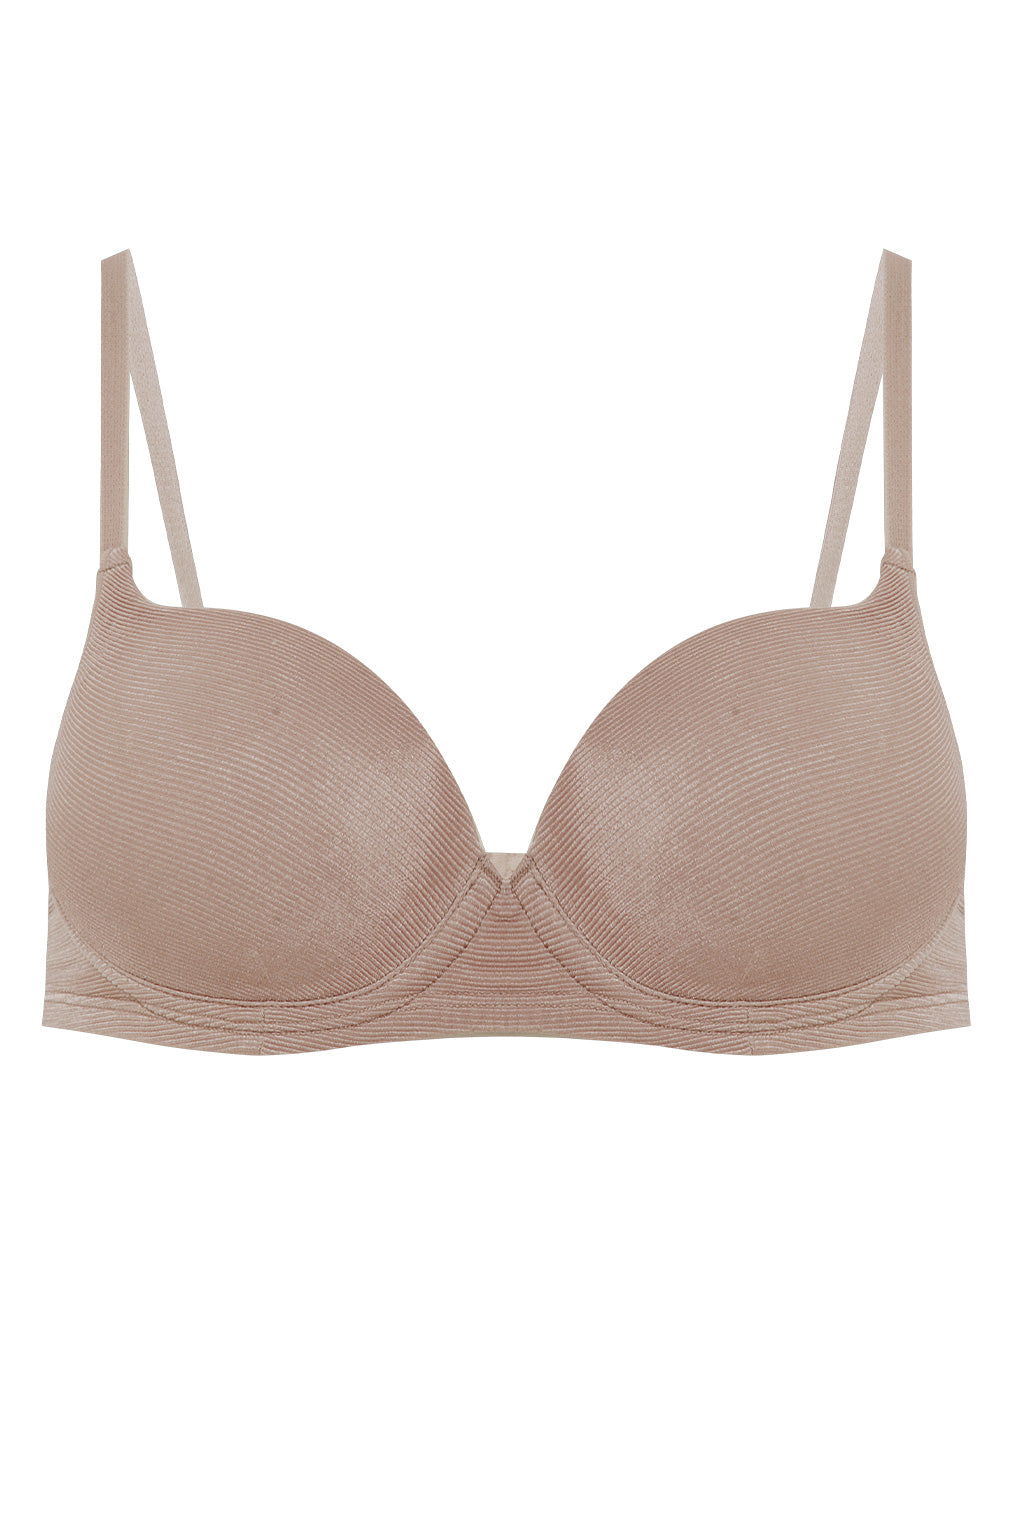 Plie CONTROL Aesthetic Bra with Front Opening - METRO BRAZIL